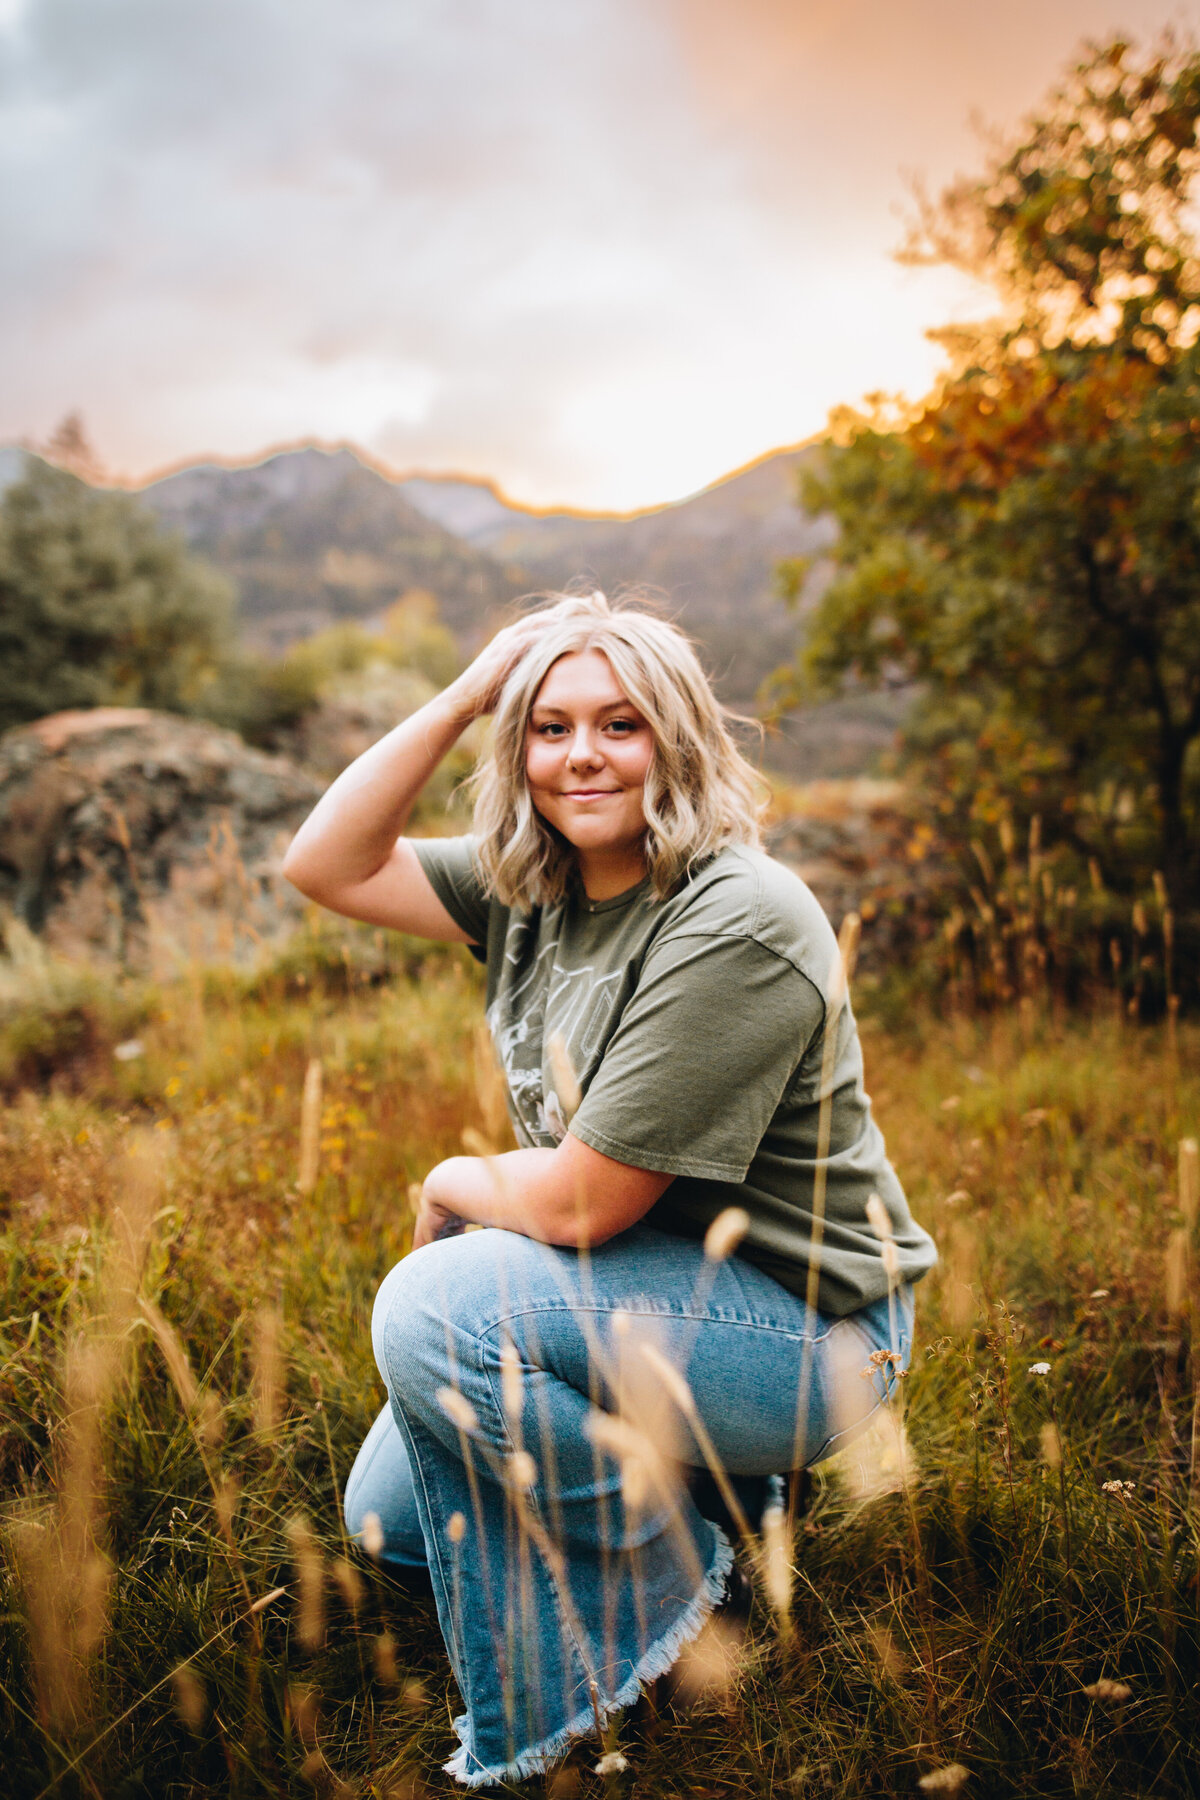 Jewel poses in a field at sunset for her Telluride senior pictures.